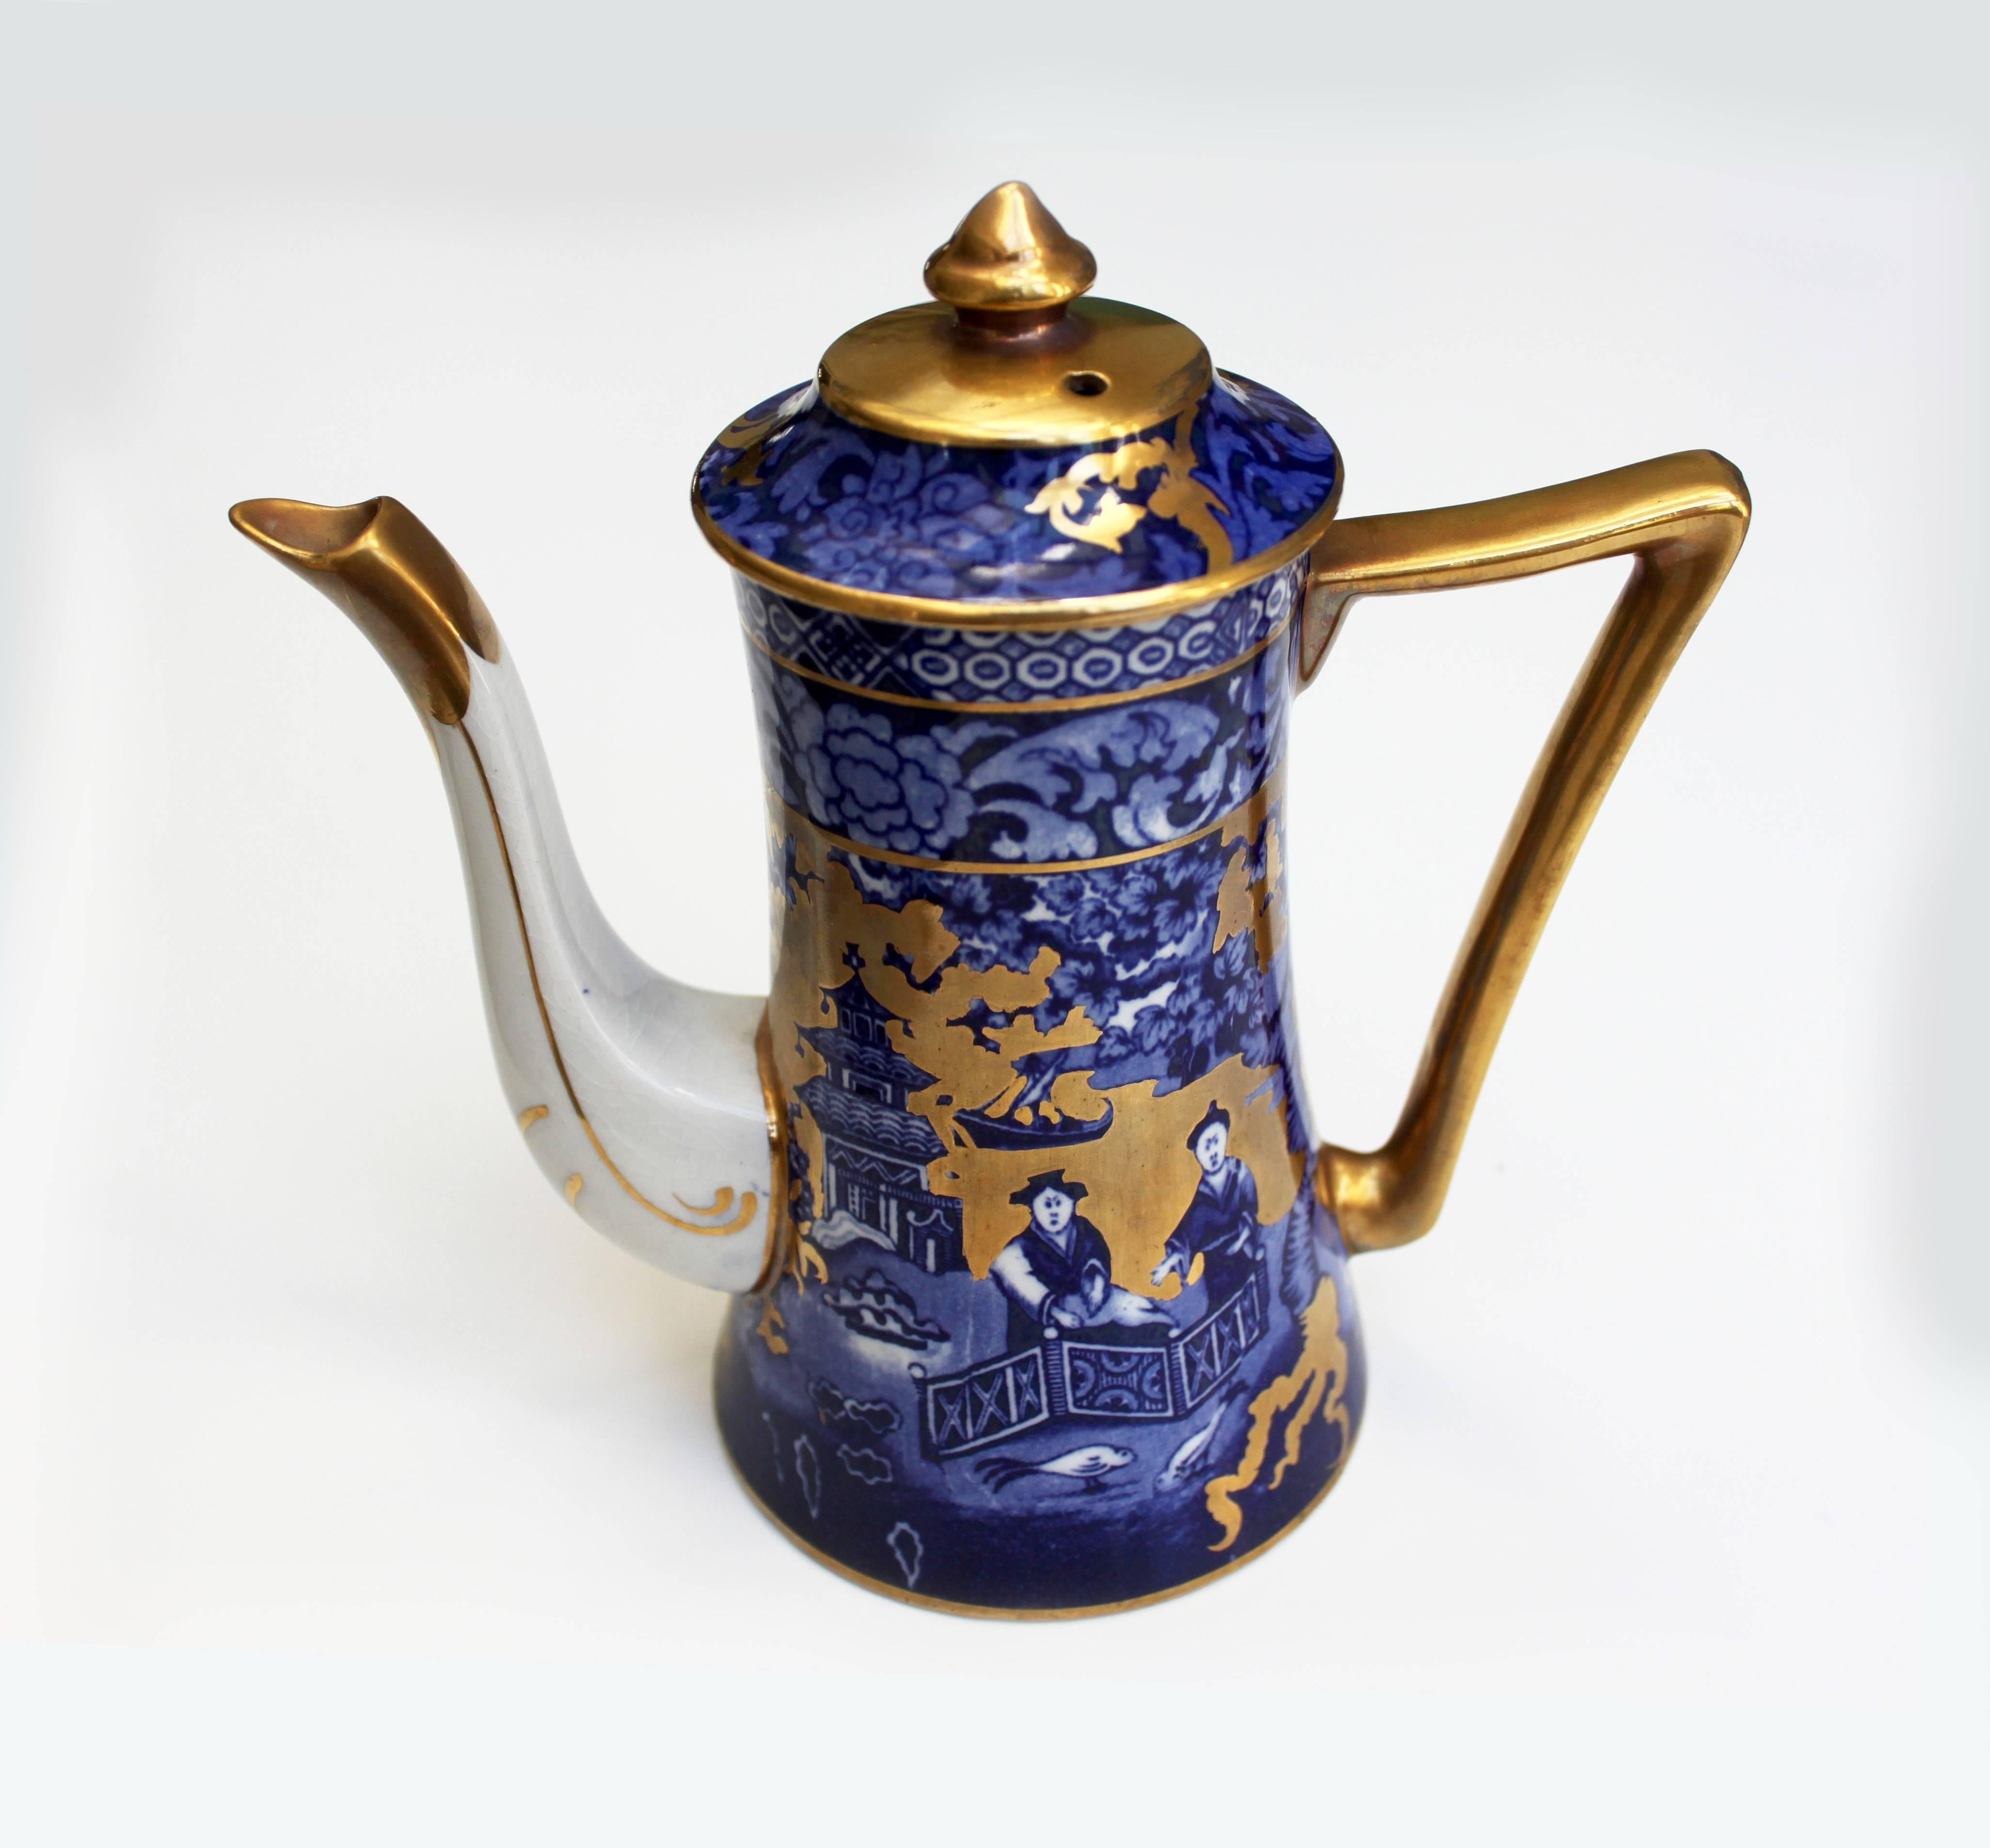 Complete vintage English coffee set for five, immaculate conditions. This coffee set is vintage English and has a clear Chinese decorative influence. It is blue and gold and consists of five cups and saucers, one coffee pot, one cream jug and a